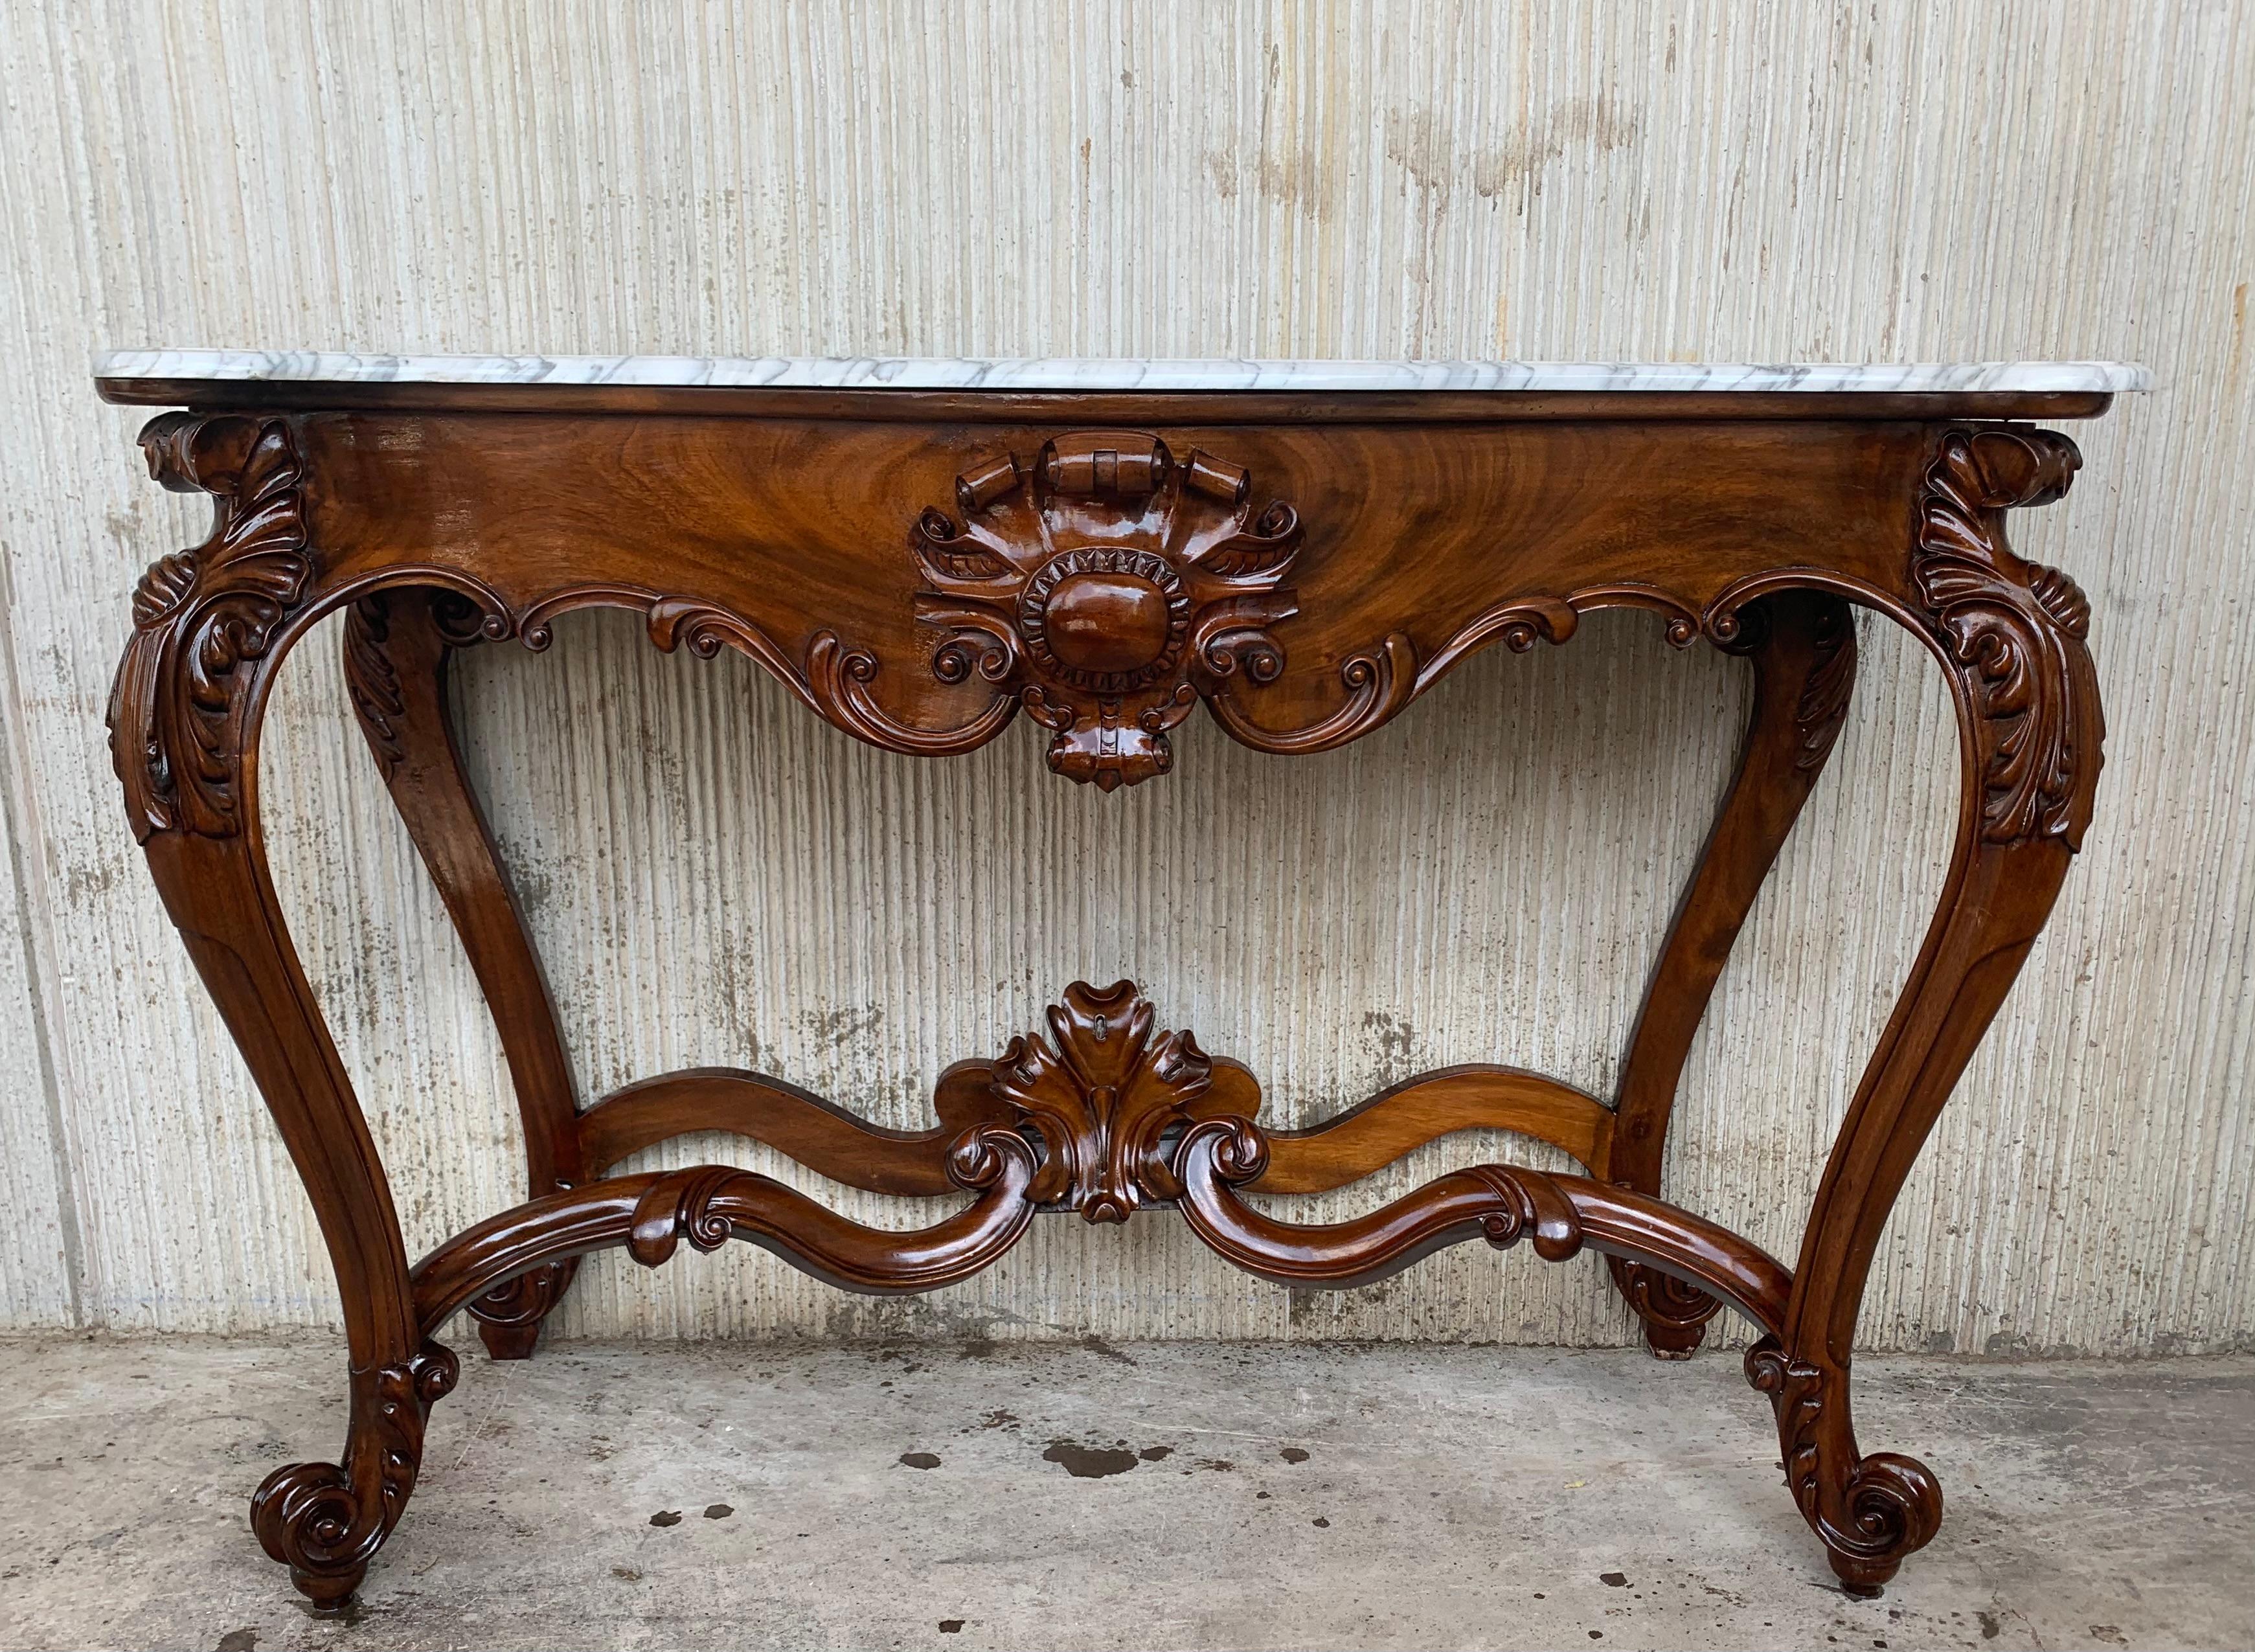 19th French Regency carved walnut console table with marble top

19th century French Regence style beautifully carved with leaves walnut console. White marble top with carved front, over hand-carved frieze supported by four cabriole legs connected